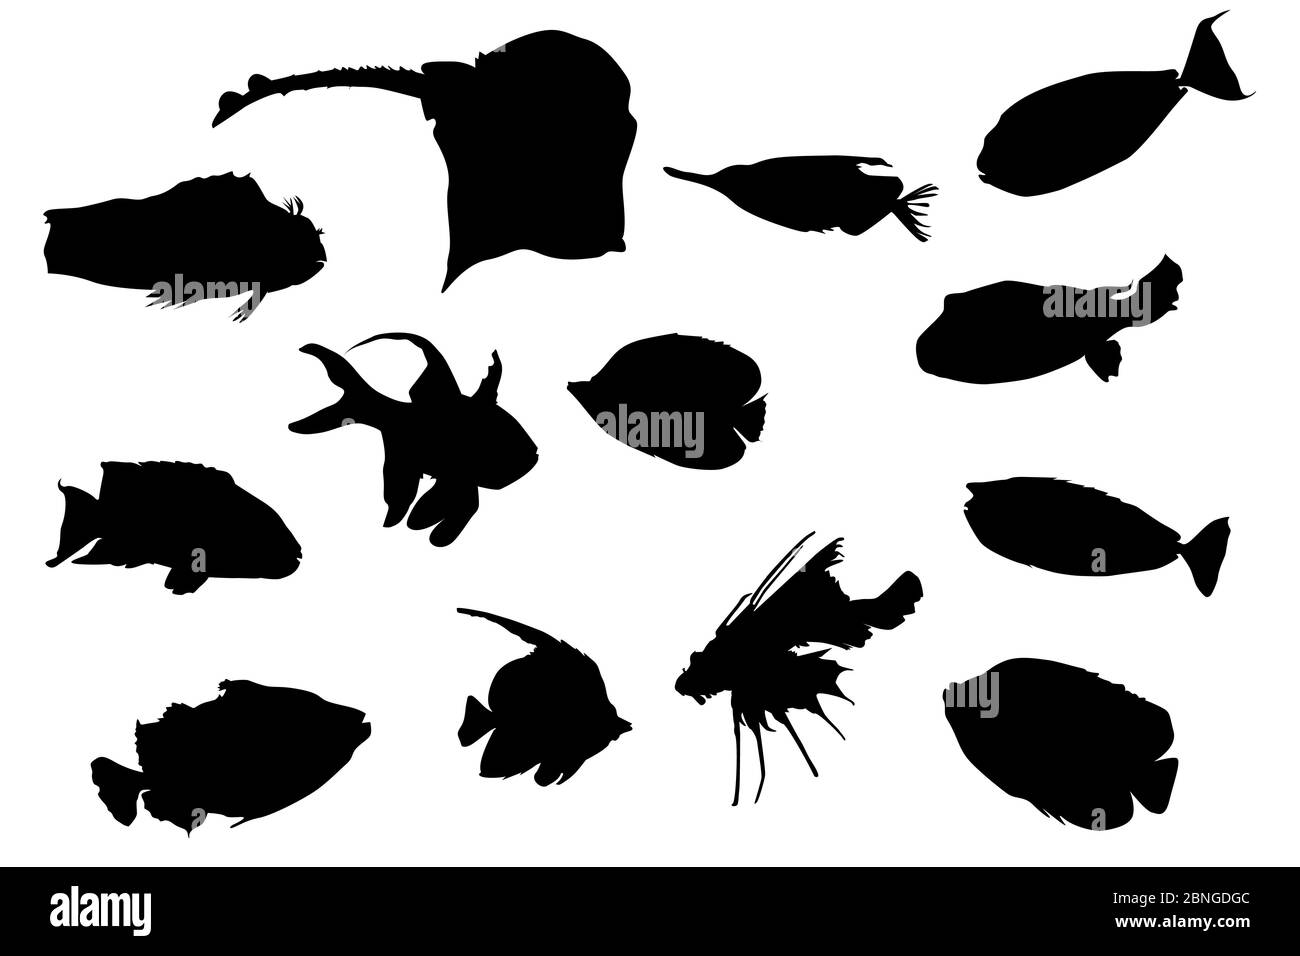 Set of fishes silhouettes isolated on white background. Collection shapes of tropical aquarium fish of different kinds. Stock vector illustration Stock Vector